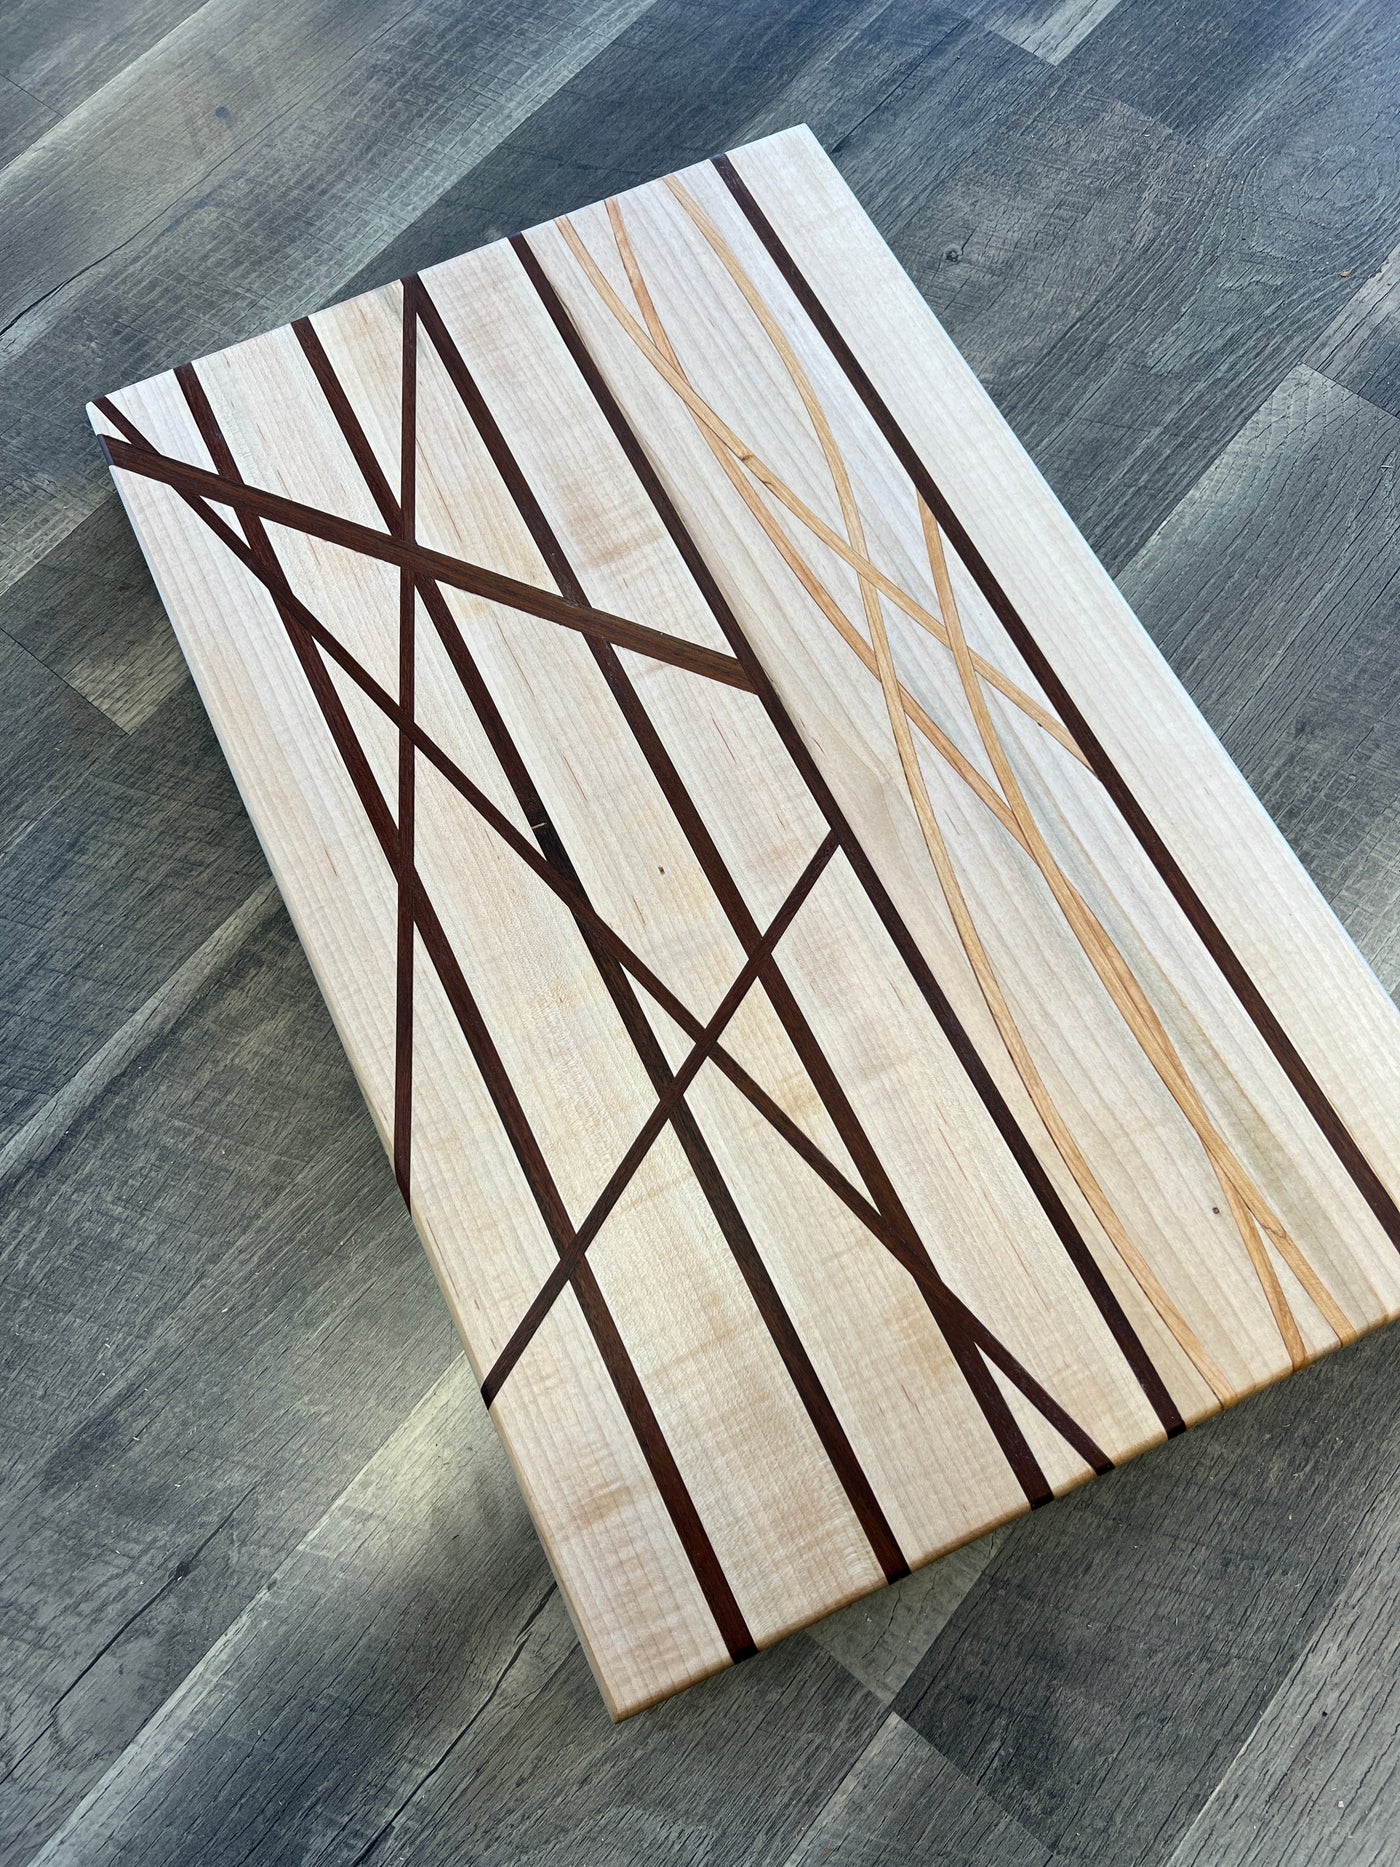 Artisanal Handcrafted Cutting Board #5